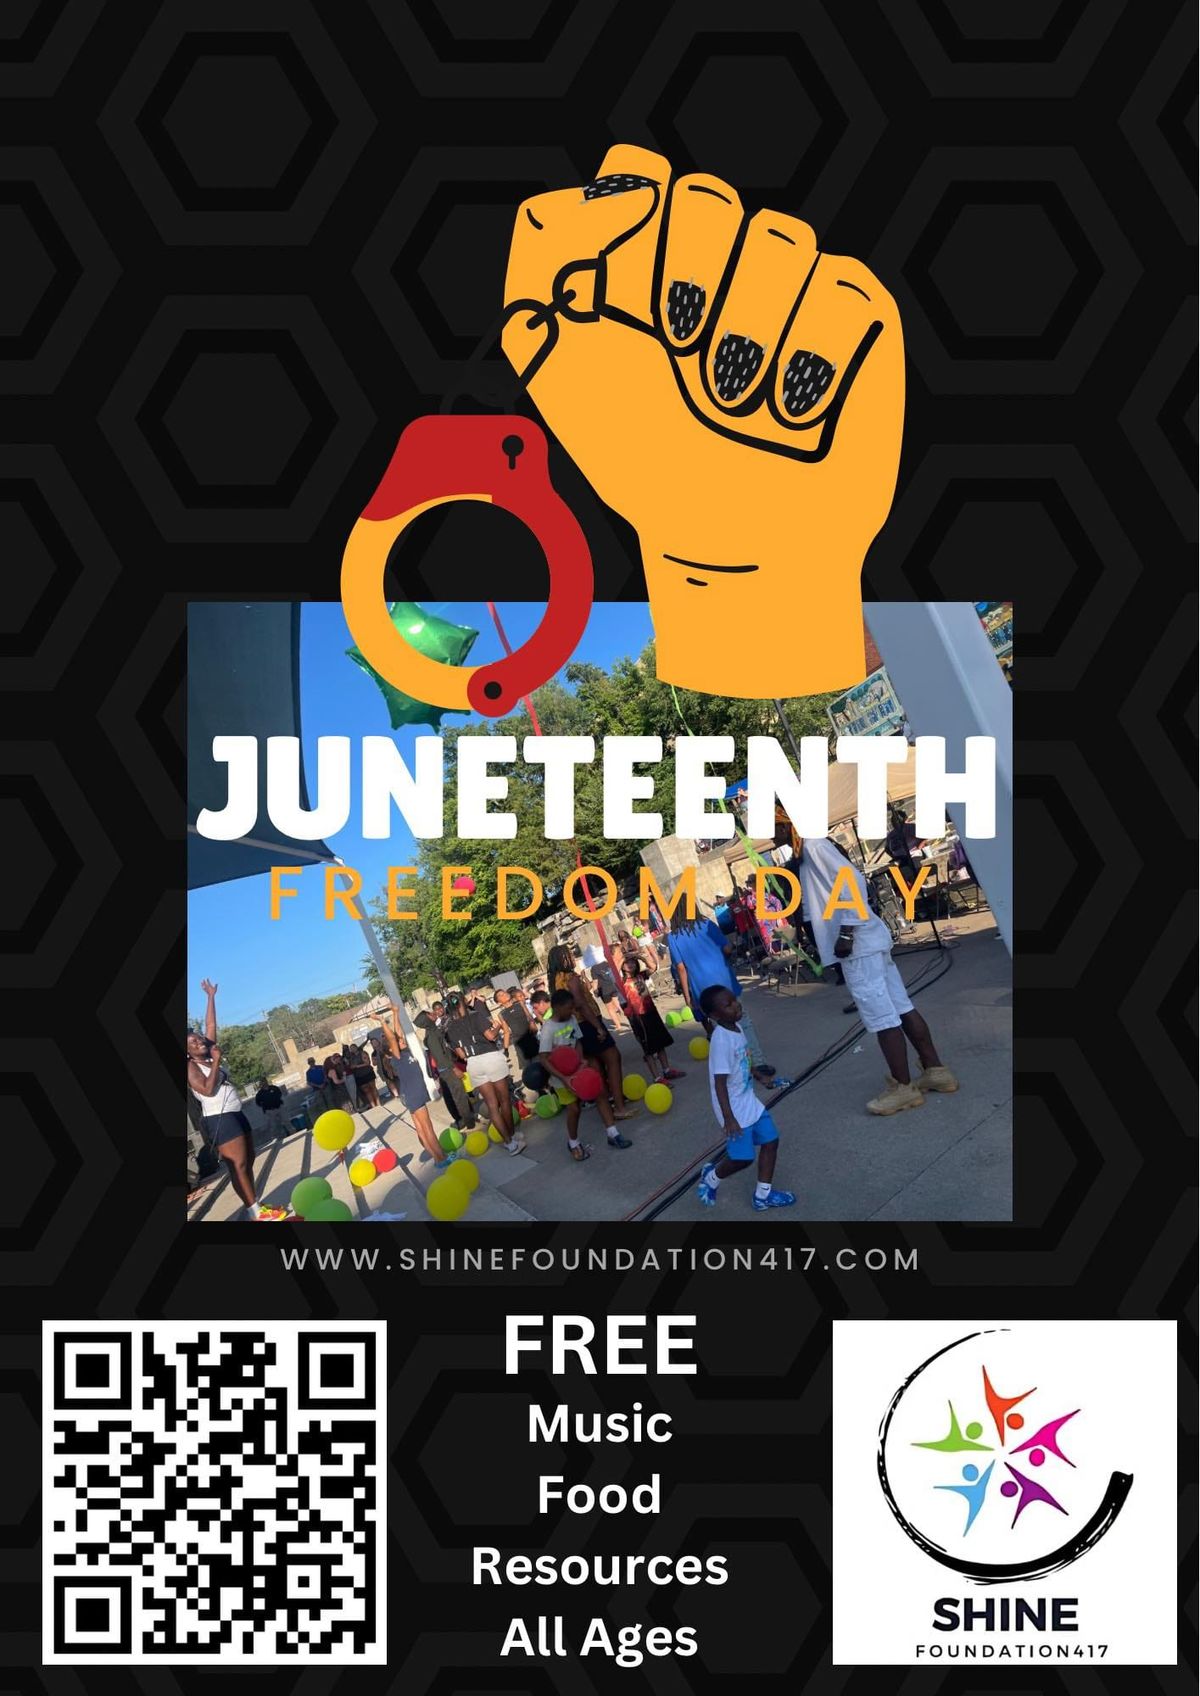 6th Annual Juneteenth Freedomfest and Music Festival 